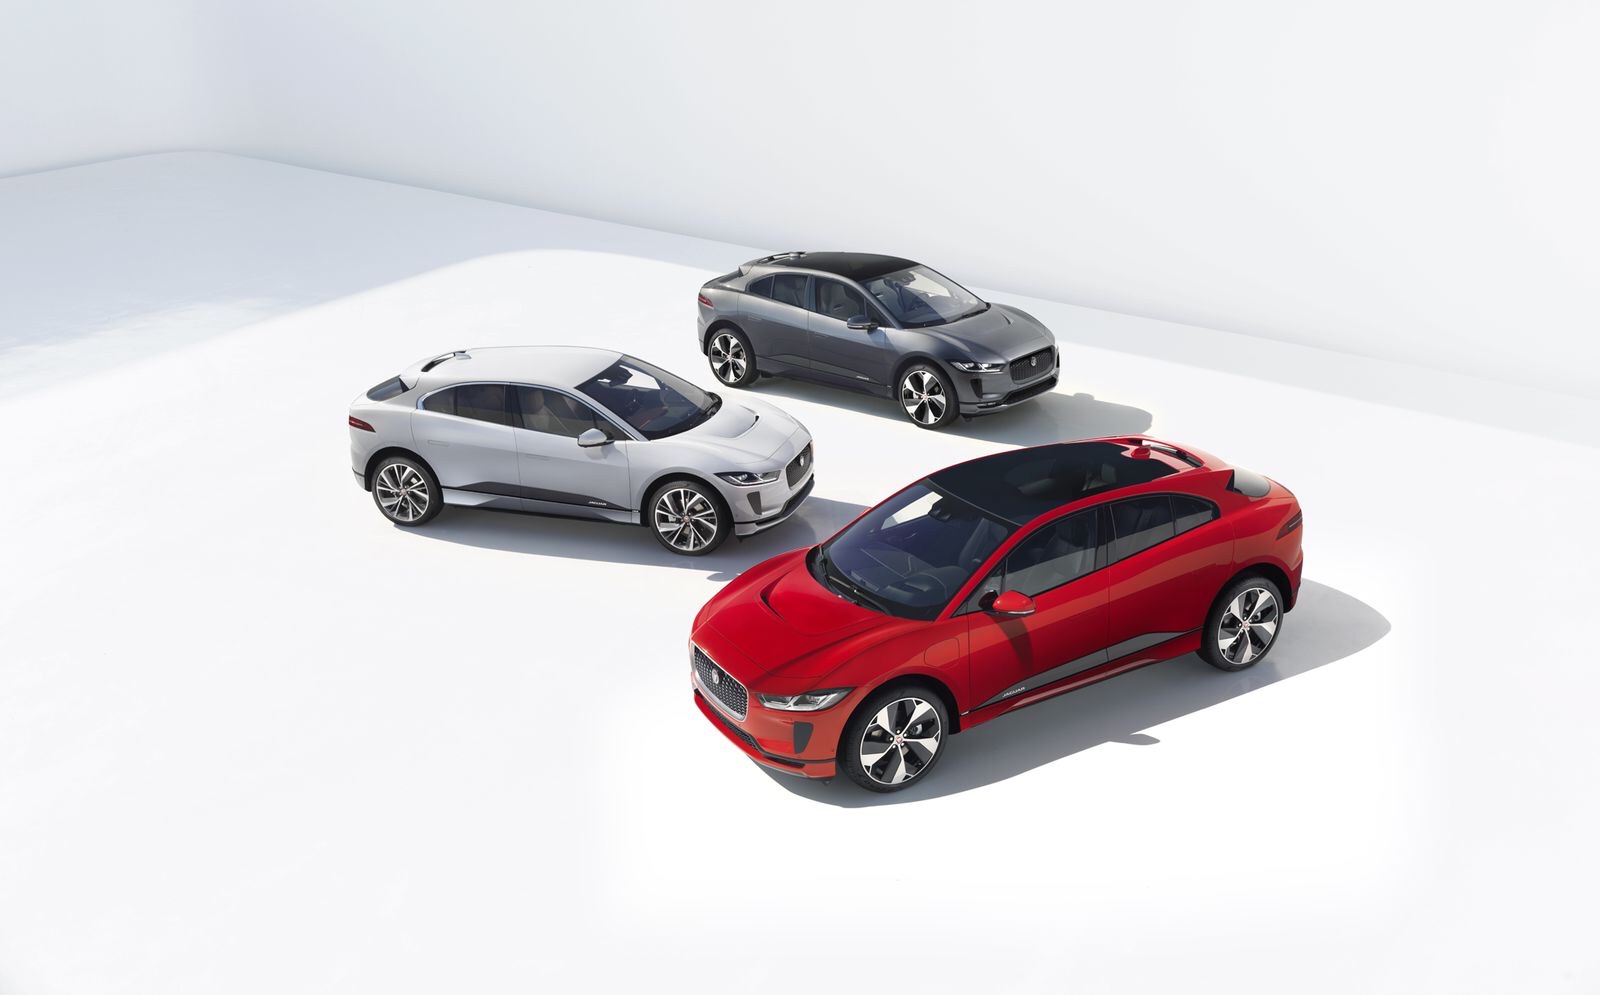 Jaguar’s I-Pace all-electric SUV is a cheaper option than a Tesla X or S